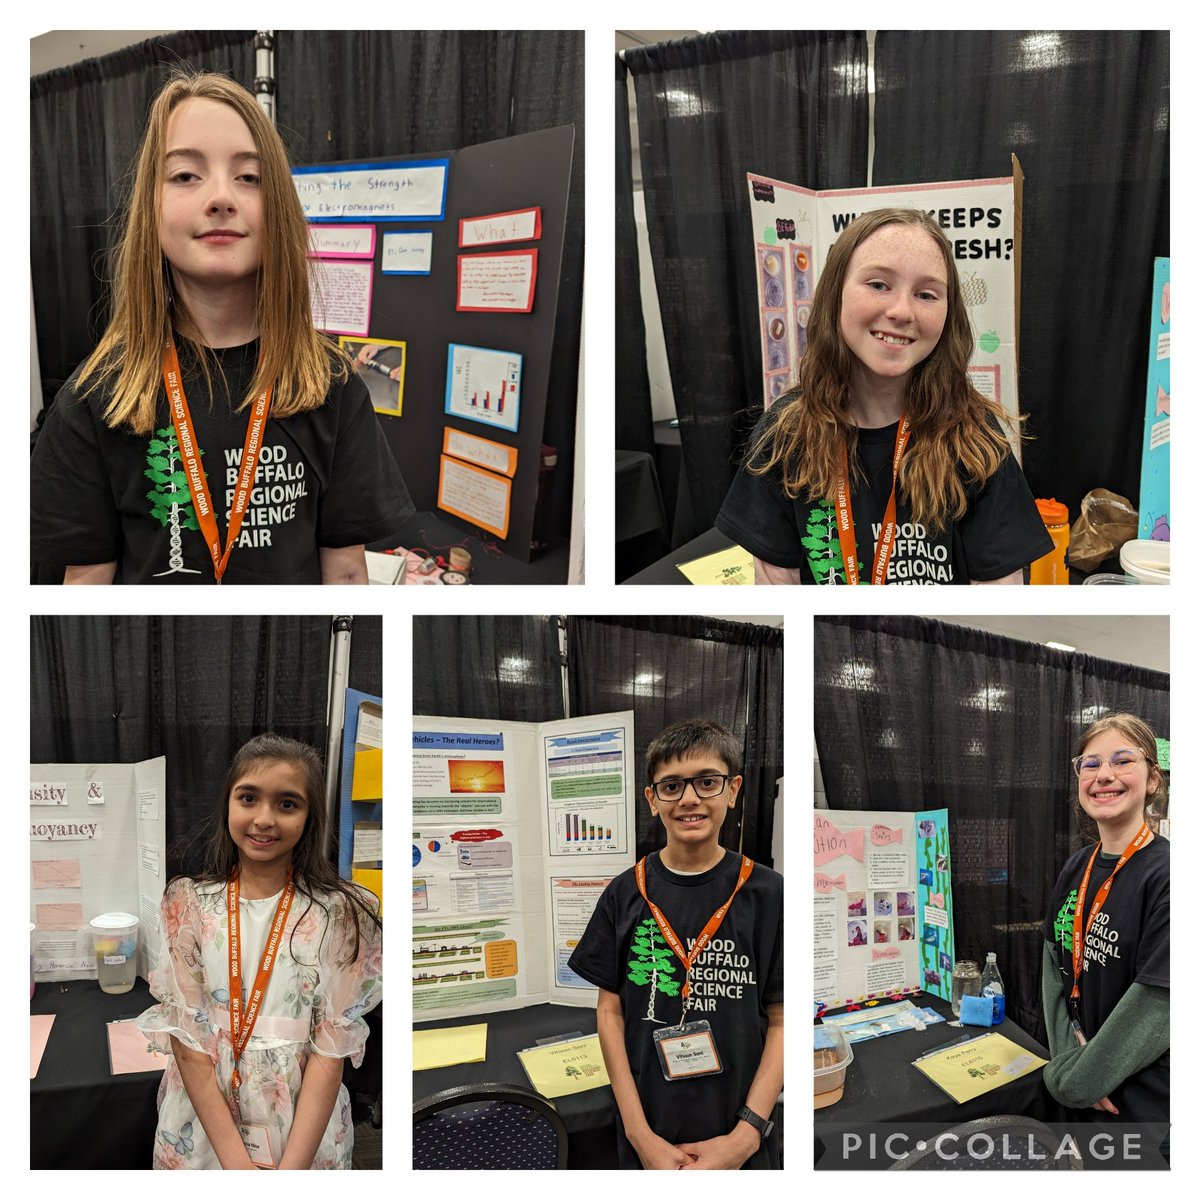 Well done to all of our CG Cougars who competed in the WBRSF this weekend and special congratulations to Mika, James, and Henisha on receiving divisional awards! We are so proud of all of you @ChristinaGFMPSD @FMPSD @WoodBuffaloRSF #cgfamily #sciencefair #cgistheplacetobe